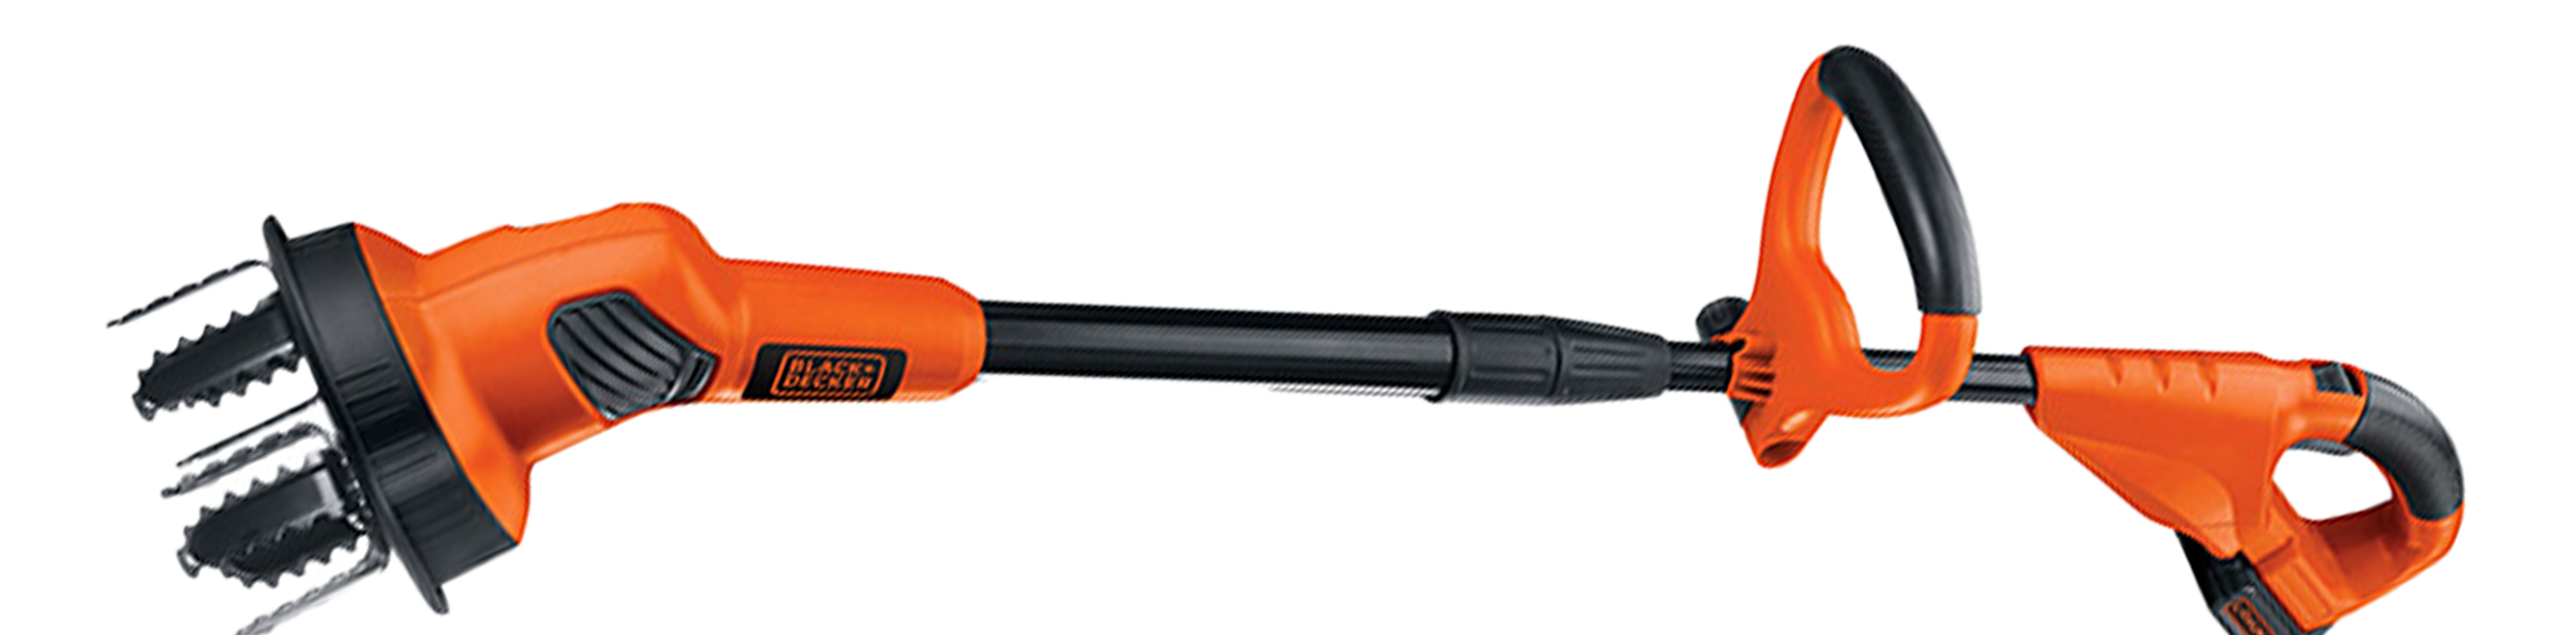 BLACK+DECKER 20V MAX Tiller with Extra 4-Ah Lithium Ion Battery Pack  (LGC120 & LB2X4020)